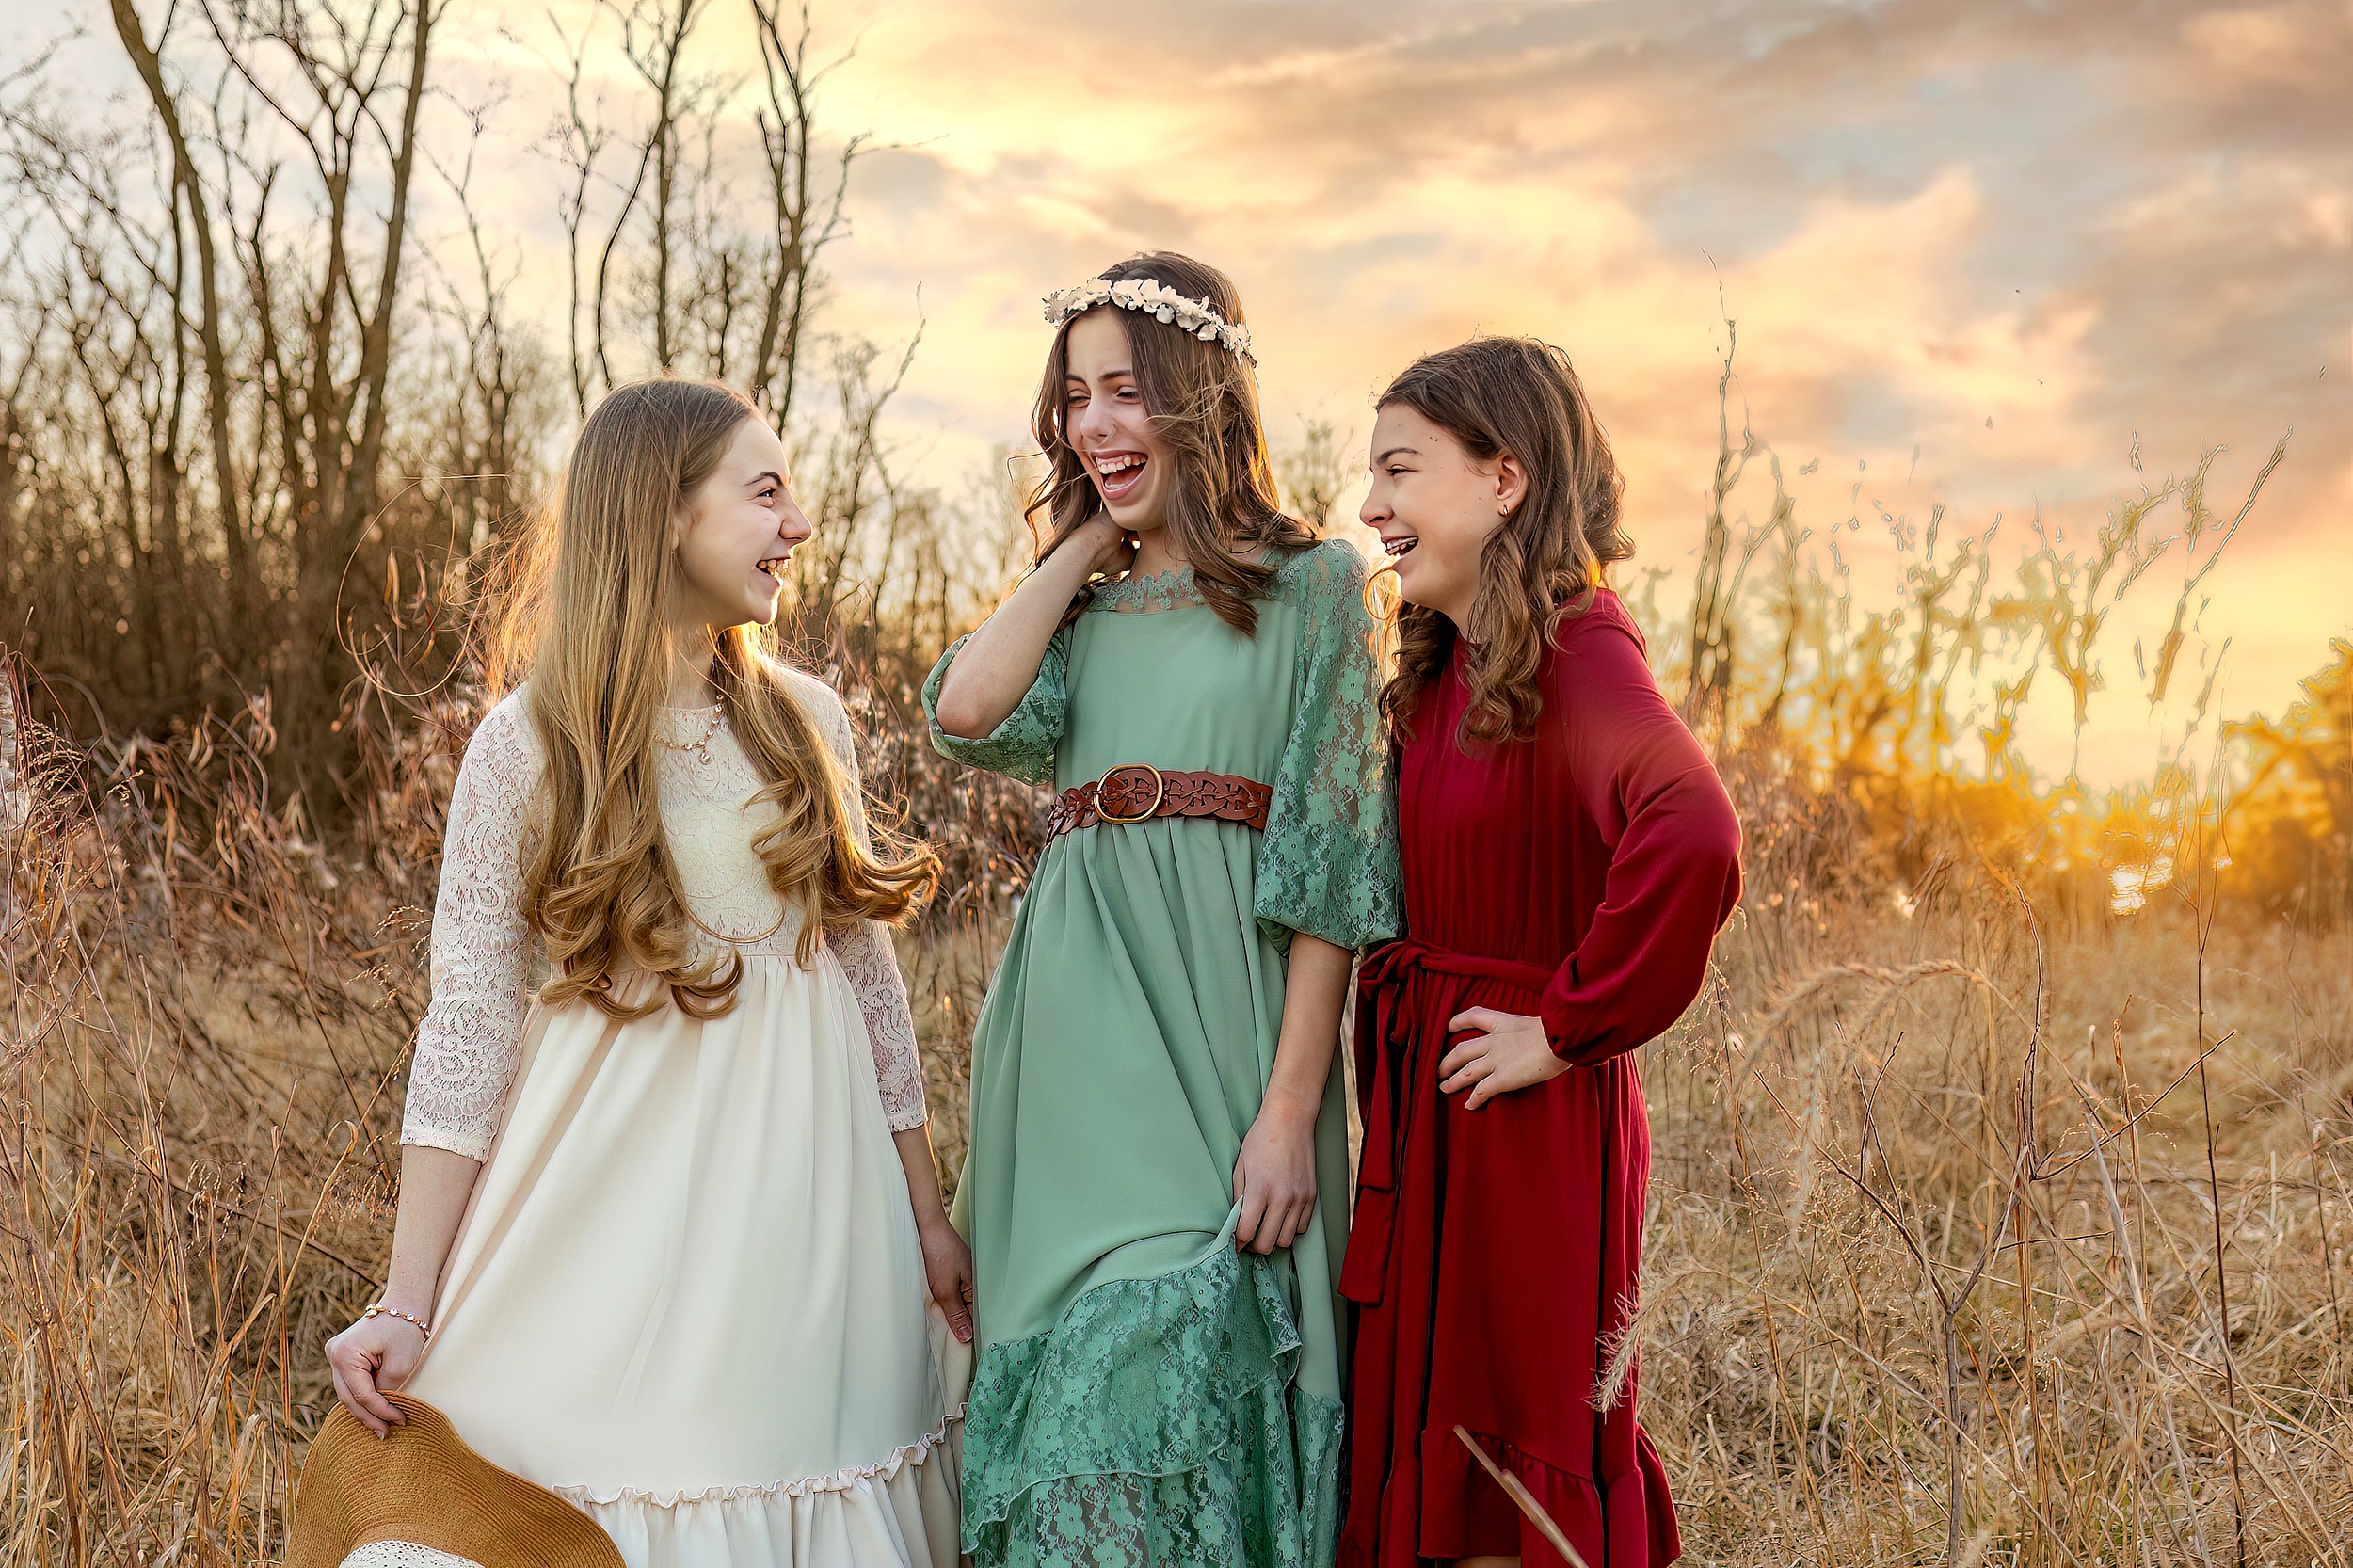 Three sisters in long dresses laugh together in a field of golden grass at sunset things to do in st louis with kids